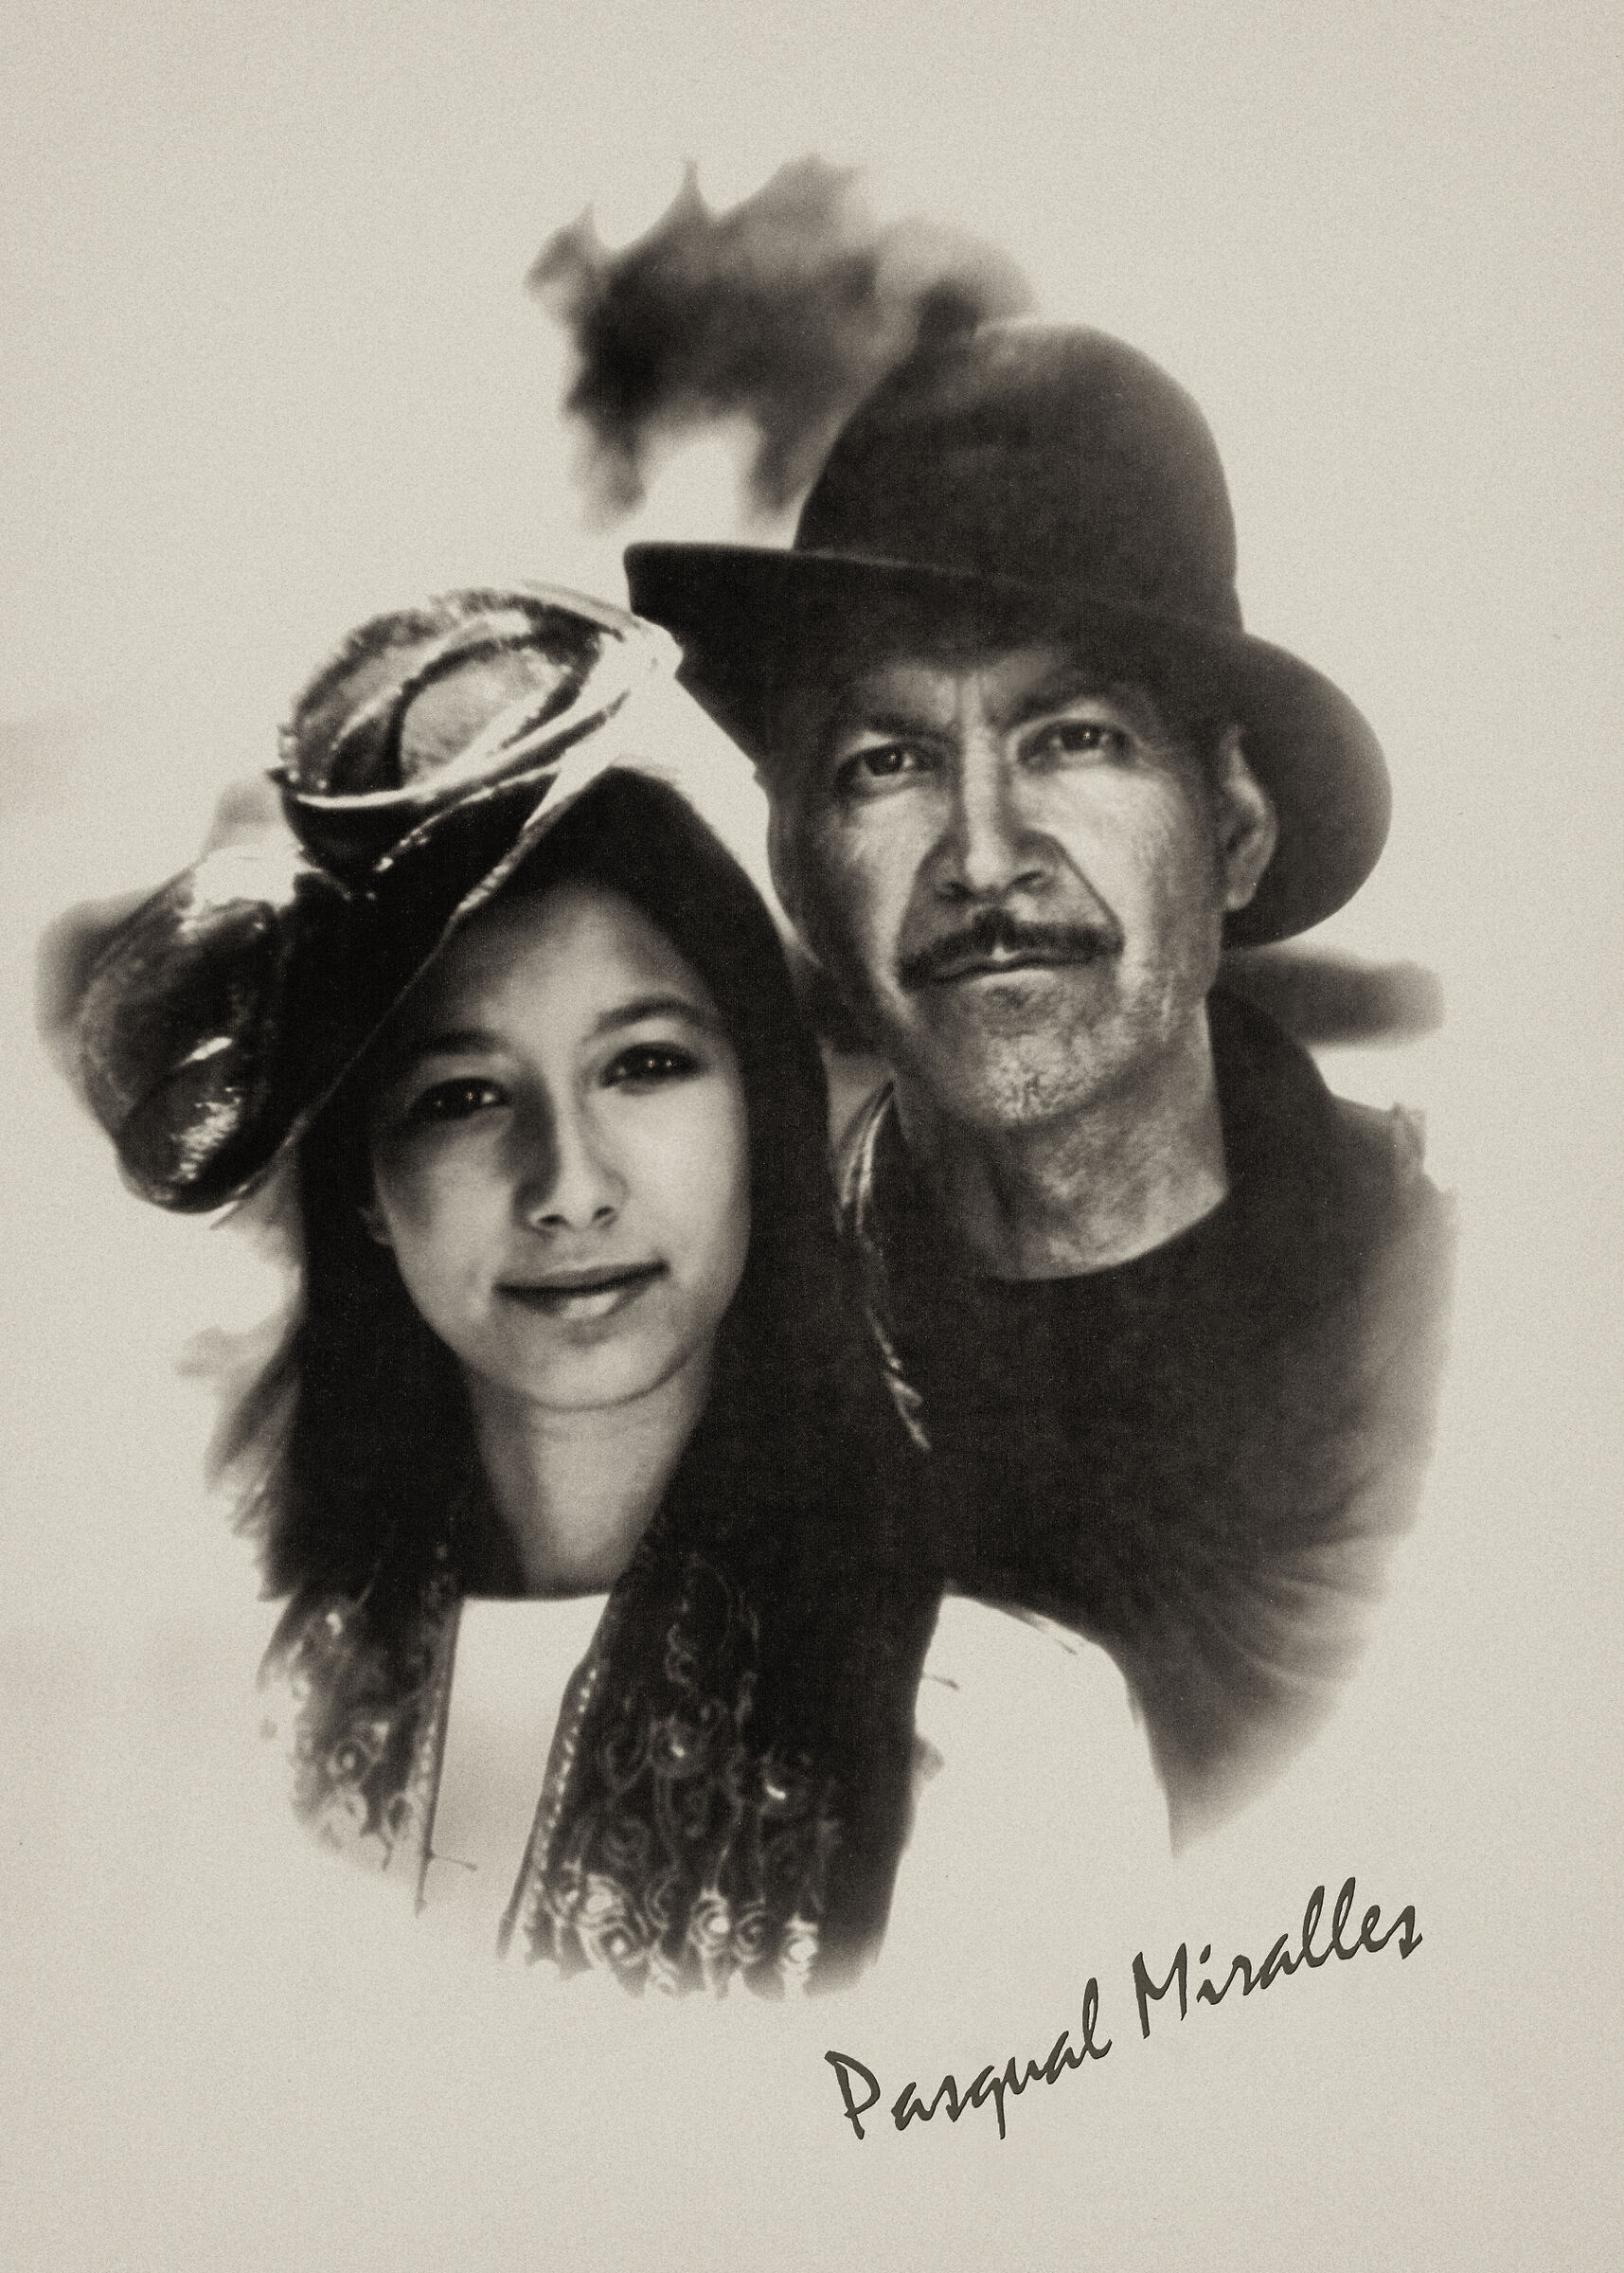 Portrait of Eli and Emme by Pasqual Miralles ...